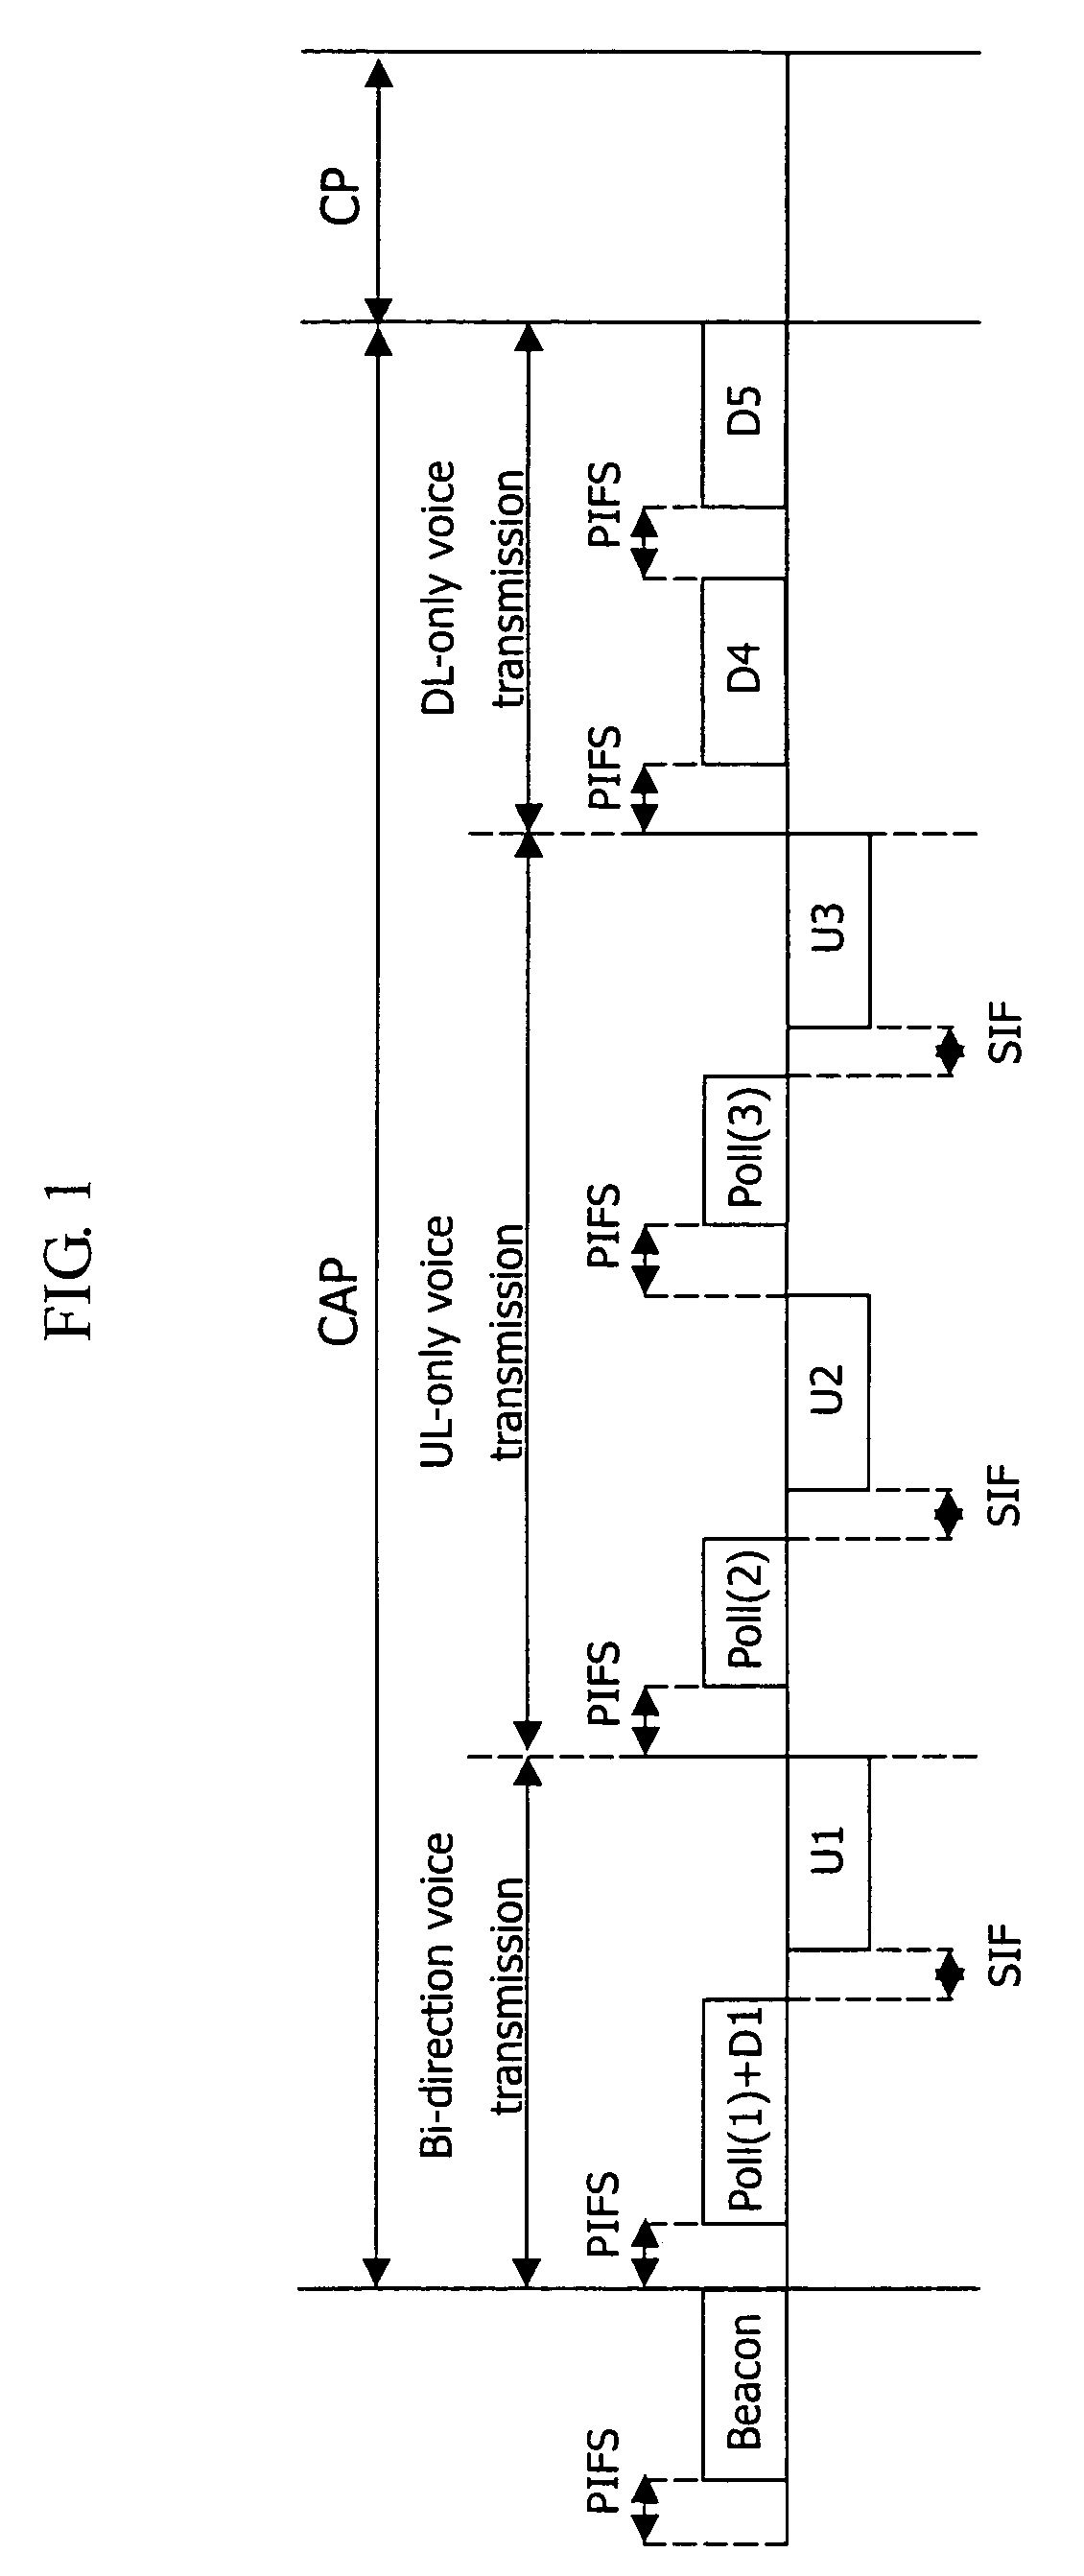 Method for power-efficient transmission supporting integrated services over wireless local area network